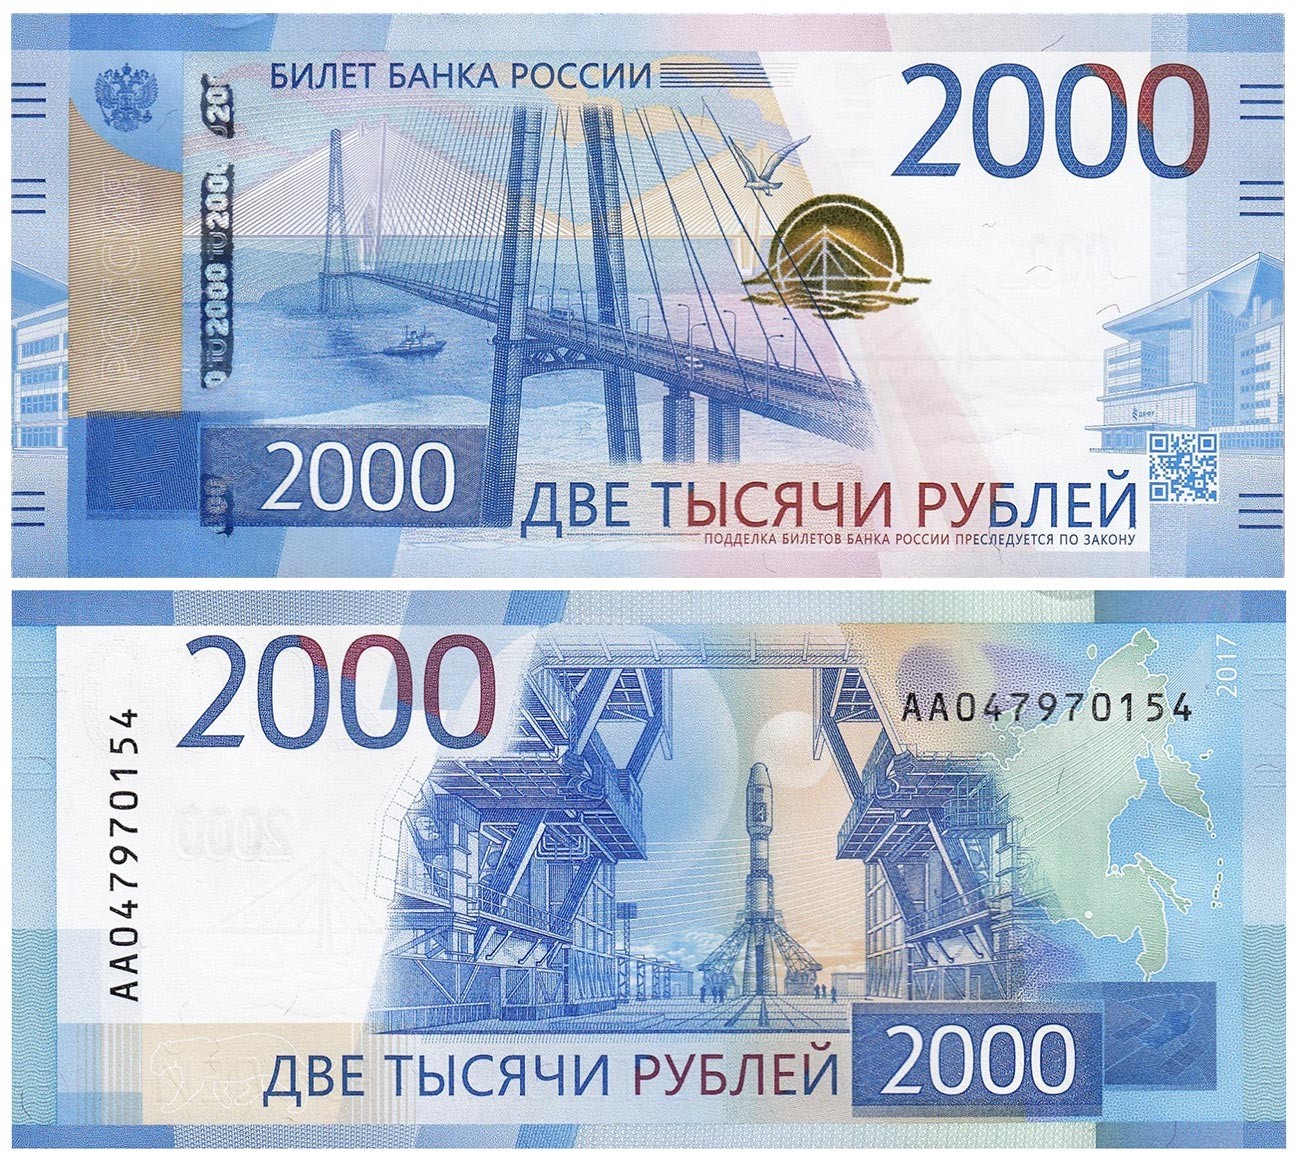 2,000 banknote features Russky Bridge and Vostochny spaceport 